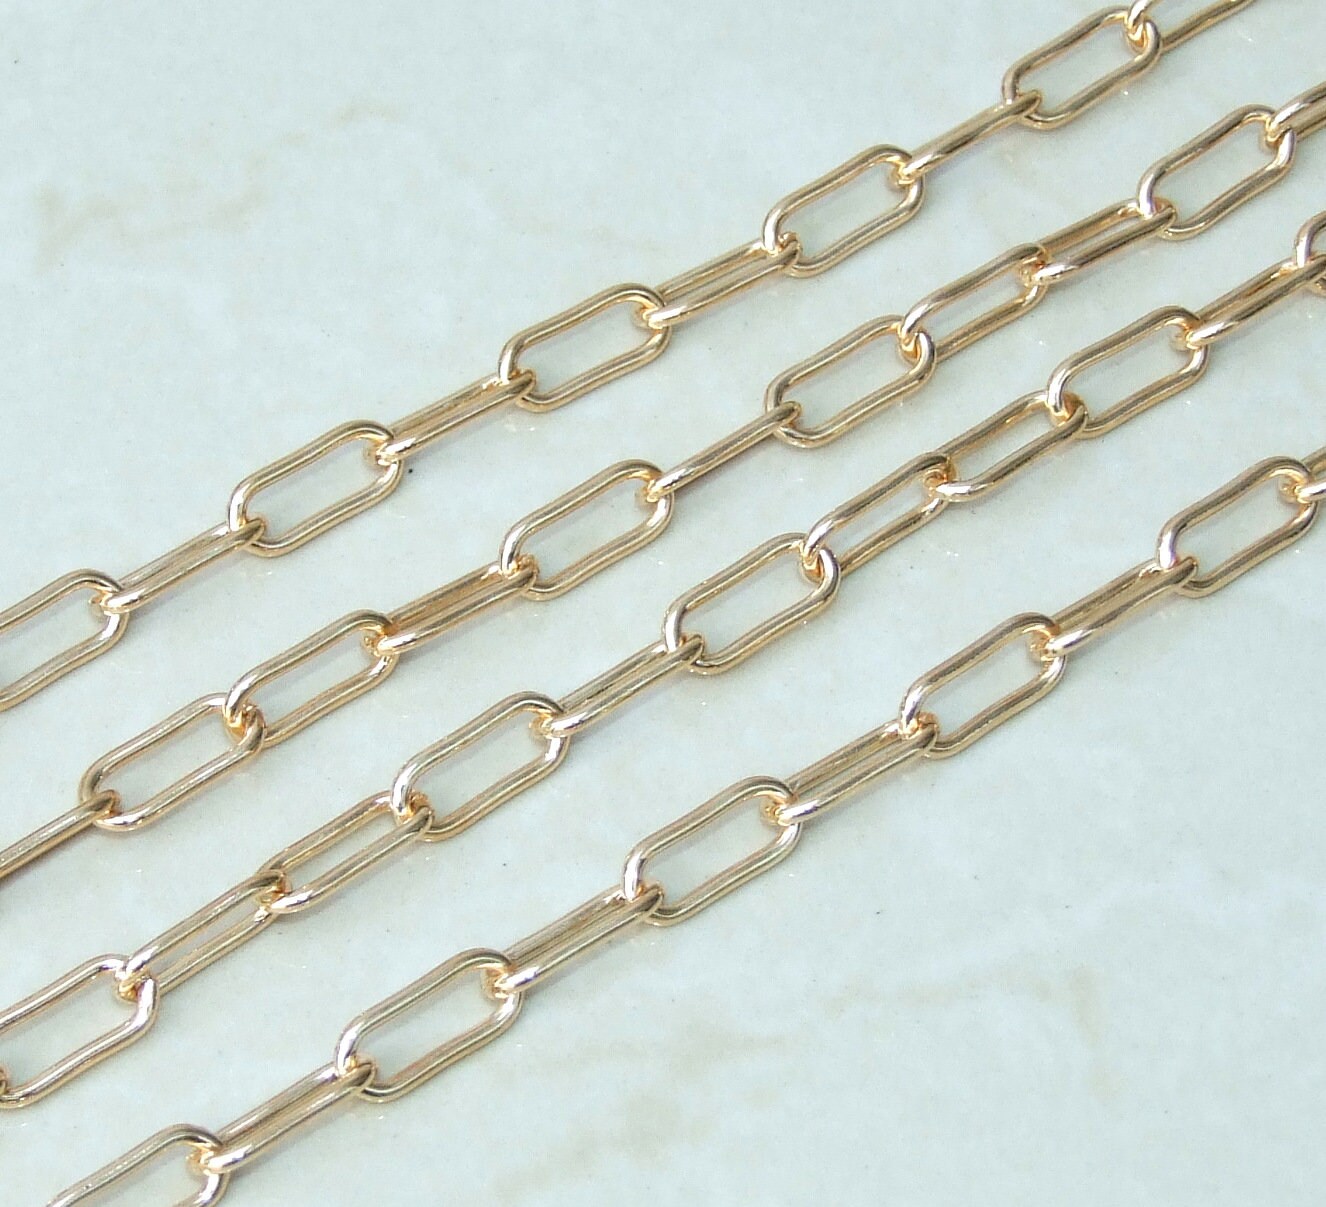 Light Gold Paper Clip Chain, Oval Cable Chain, Jewelry Chain, Necklace Chain, Body Chain, Bulk Chain, Jewelry Supplies, 16mm x 7mm, 01B-LG